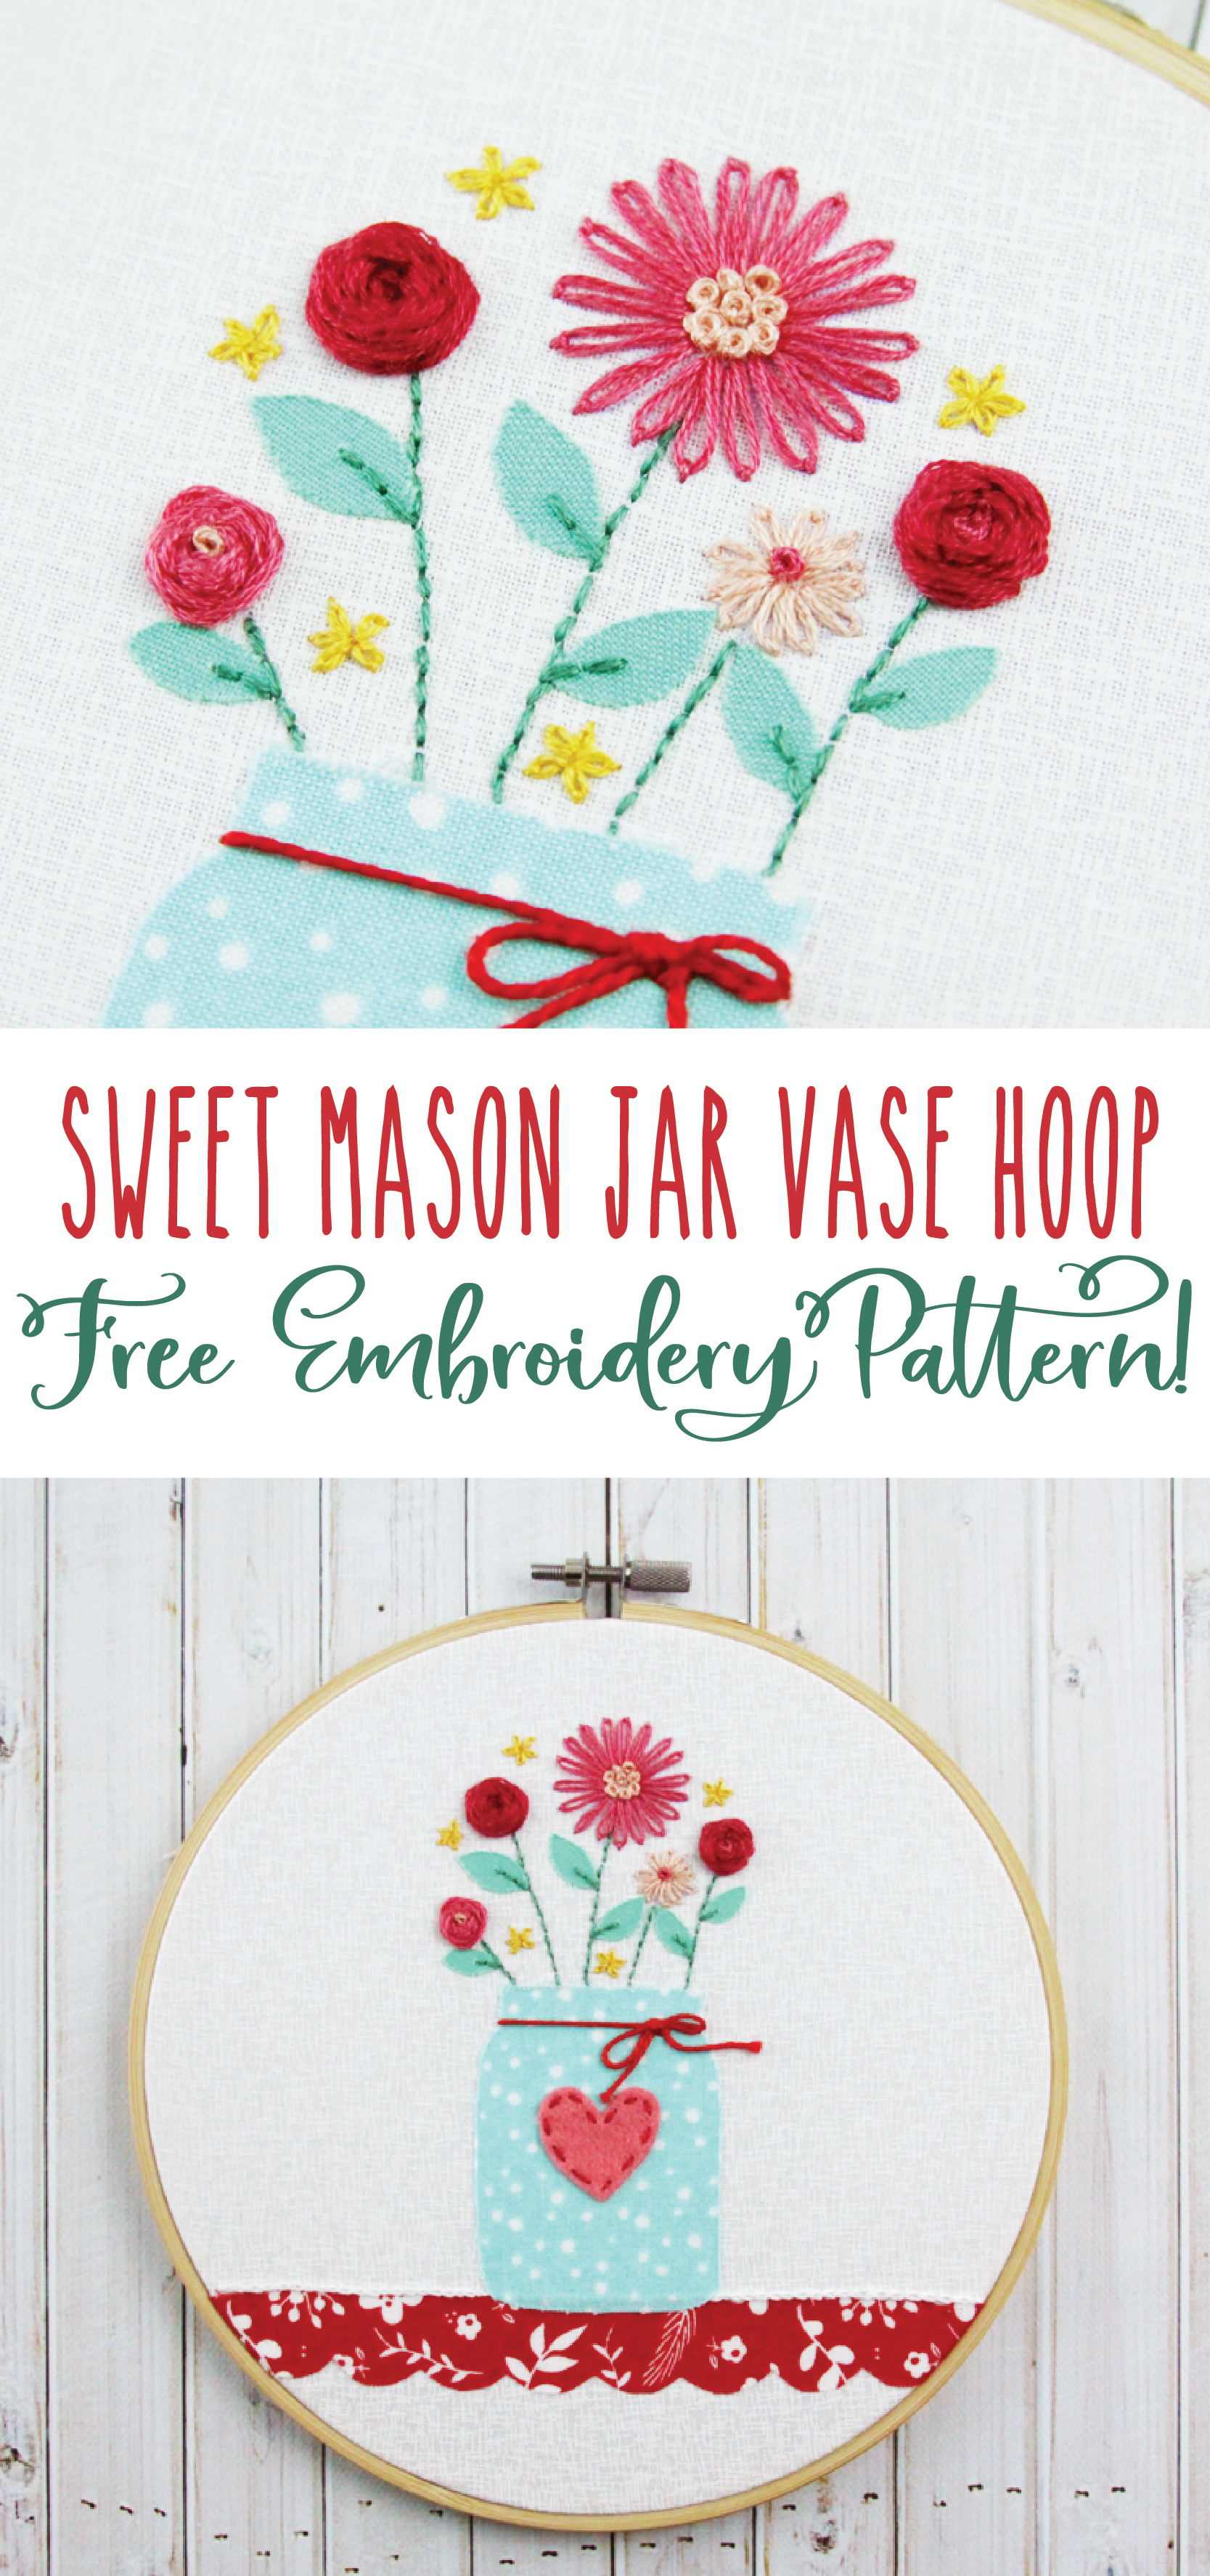 How To Make Your Own Embroidery Pattern Sweet Mason Jar Vase Hoop Free Embroidery Pattern